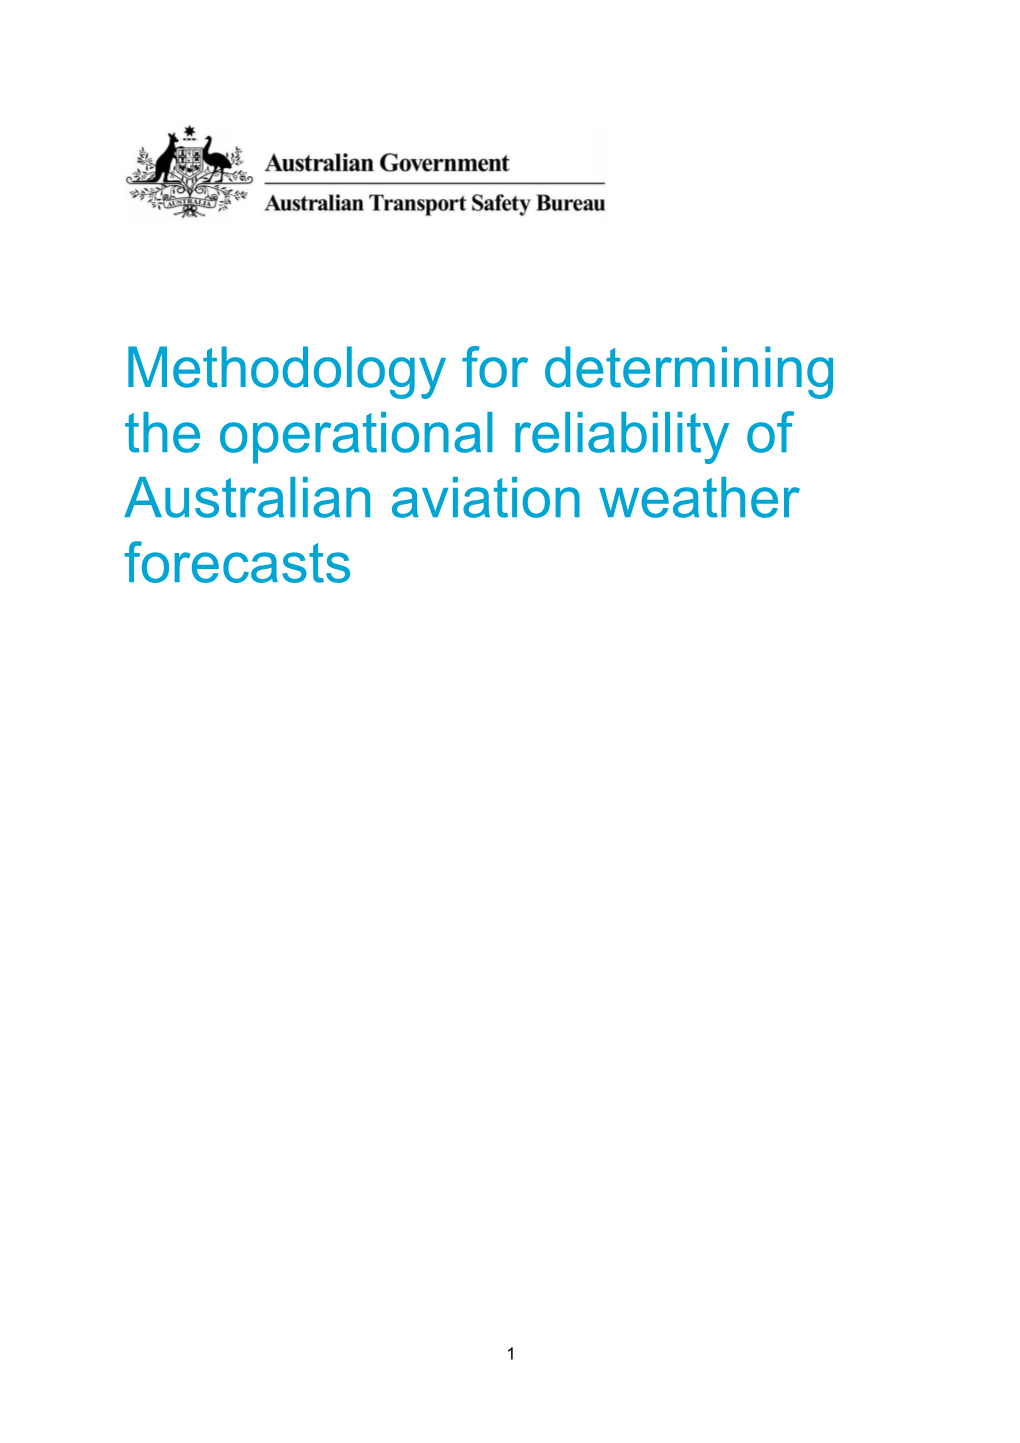 Methodology for Determining the Operational Reliability of Australian Aviation Weather Forecasts